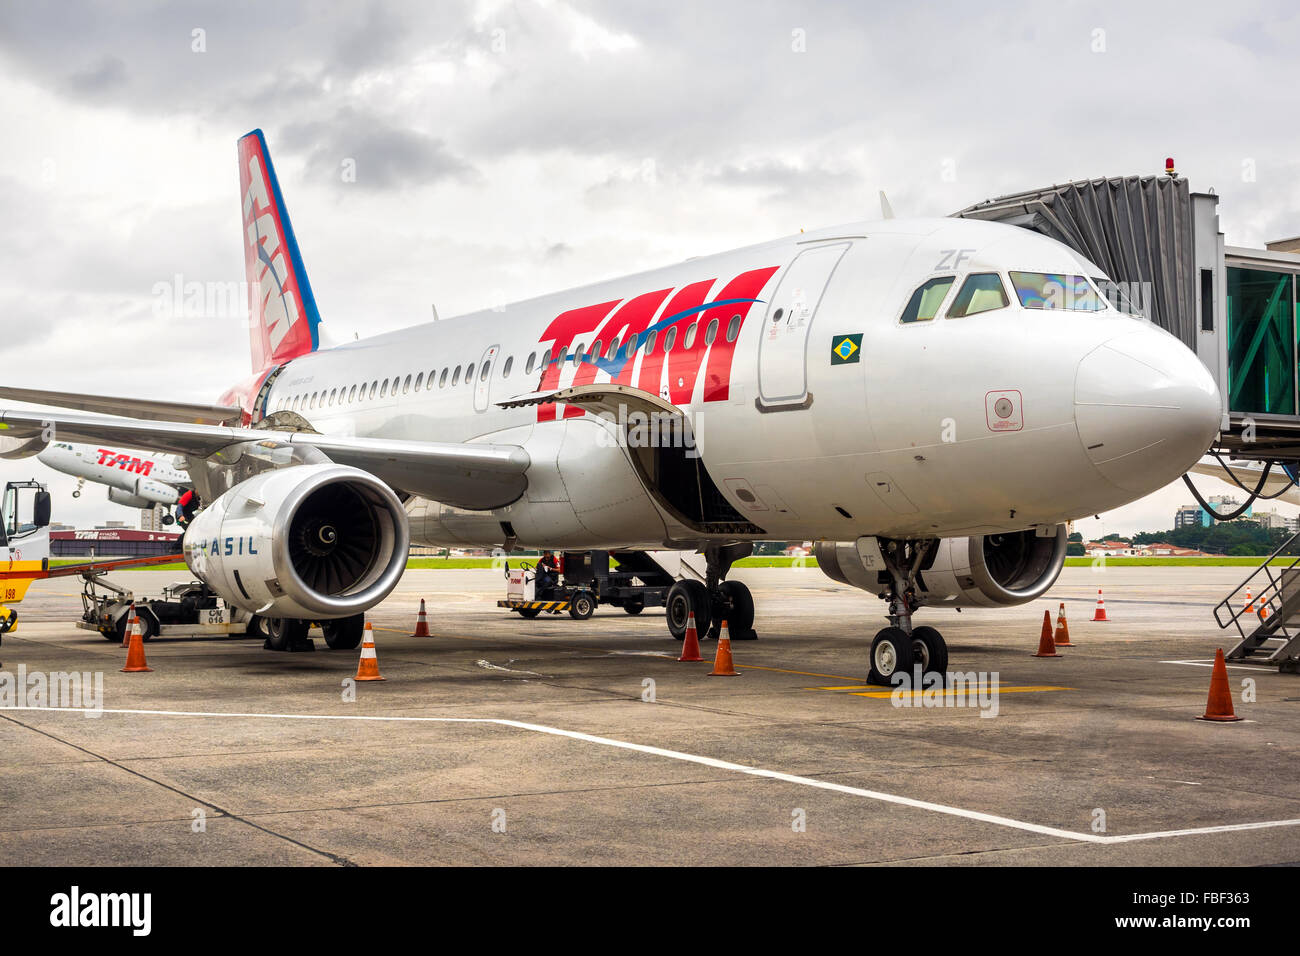 TAM Airlines Airbus 320 parked at Guarulhos airport in Sao Paulo, Brazil. TAM is the Brazilian brand of Latam Airlines. Stock Photo